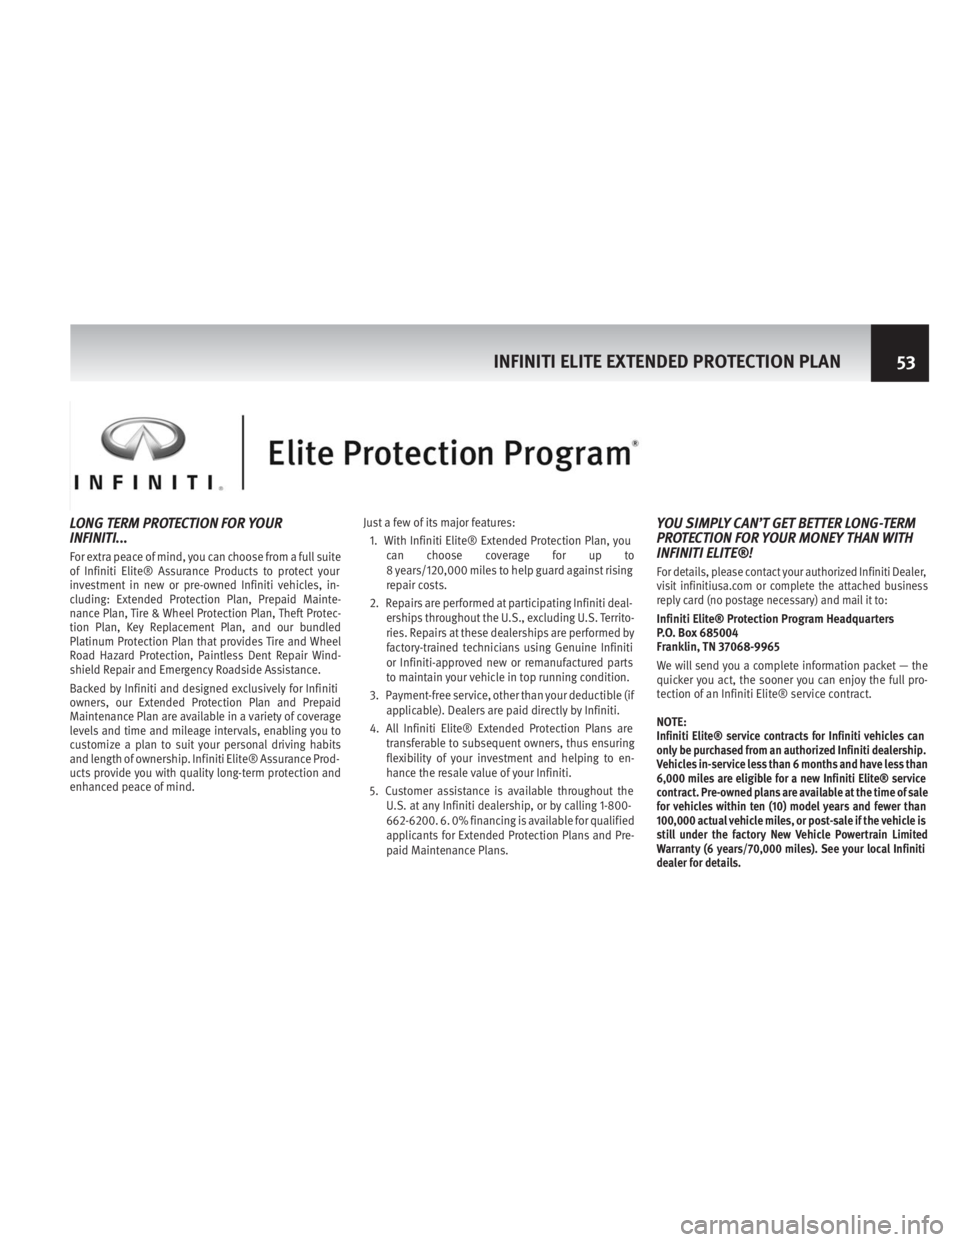 INFINITI QX80 2014  Warranty Information Booklet LONG TERM PROTECTION FOR YOUR
INFINITI...
For extra peace of mind, you can choose from a full suite
of Infiniti Elite® Assurance Products to protect your
investment in new or pre-owned Infiniti vehic